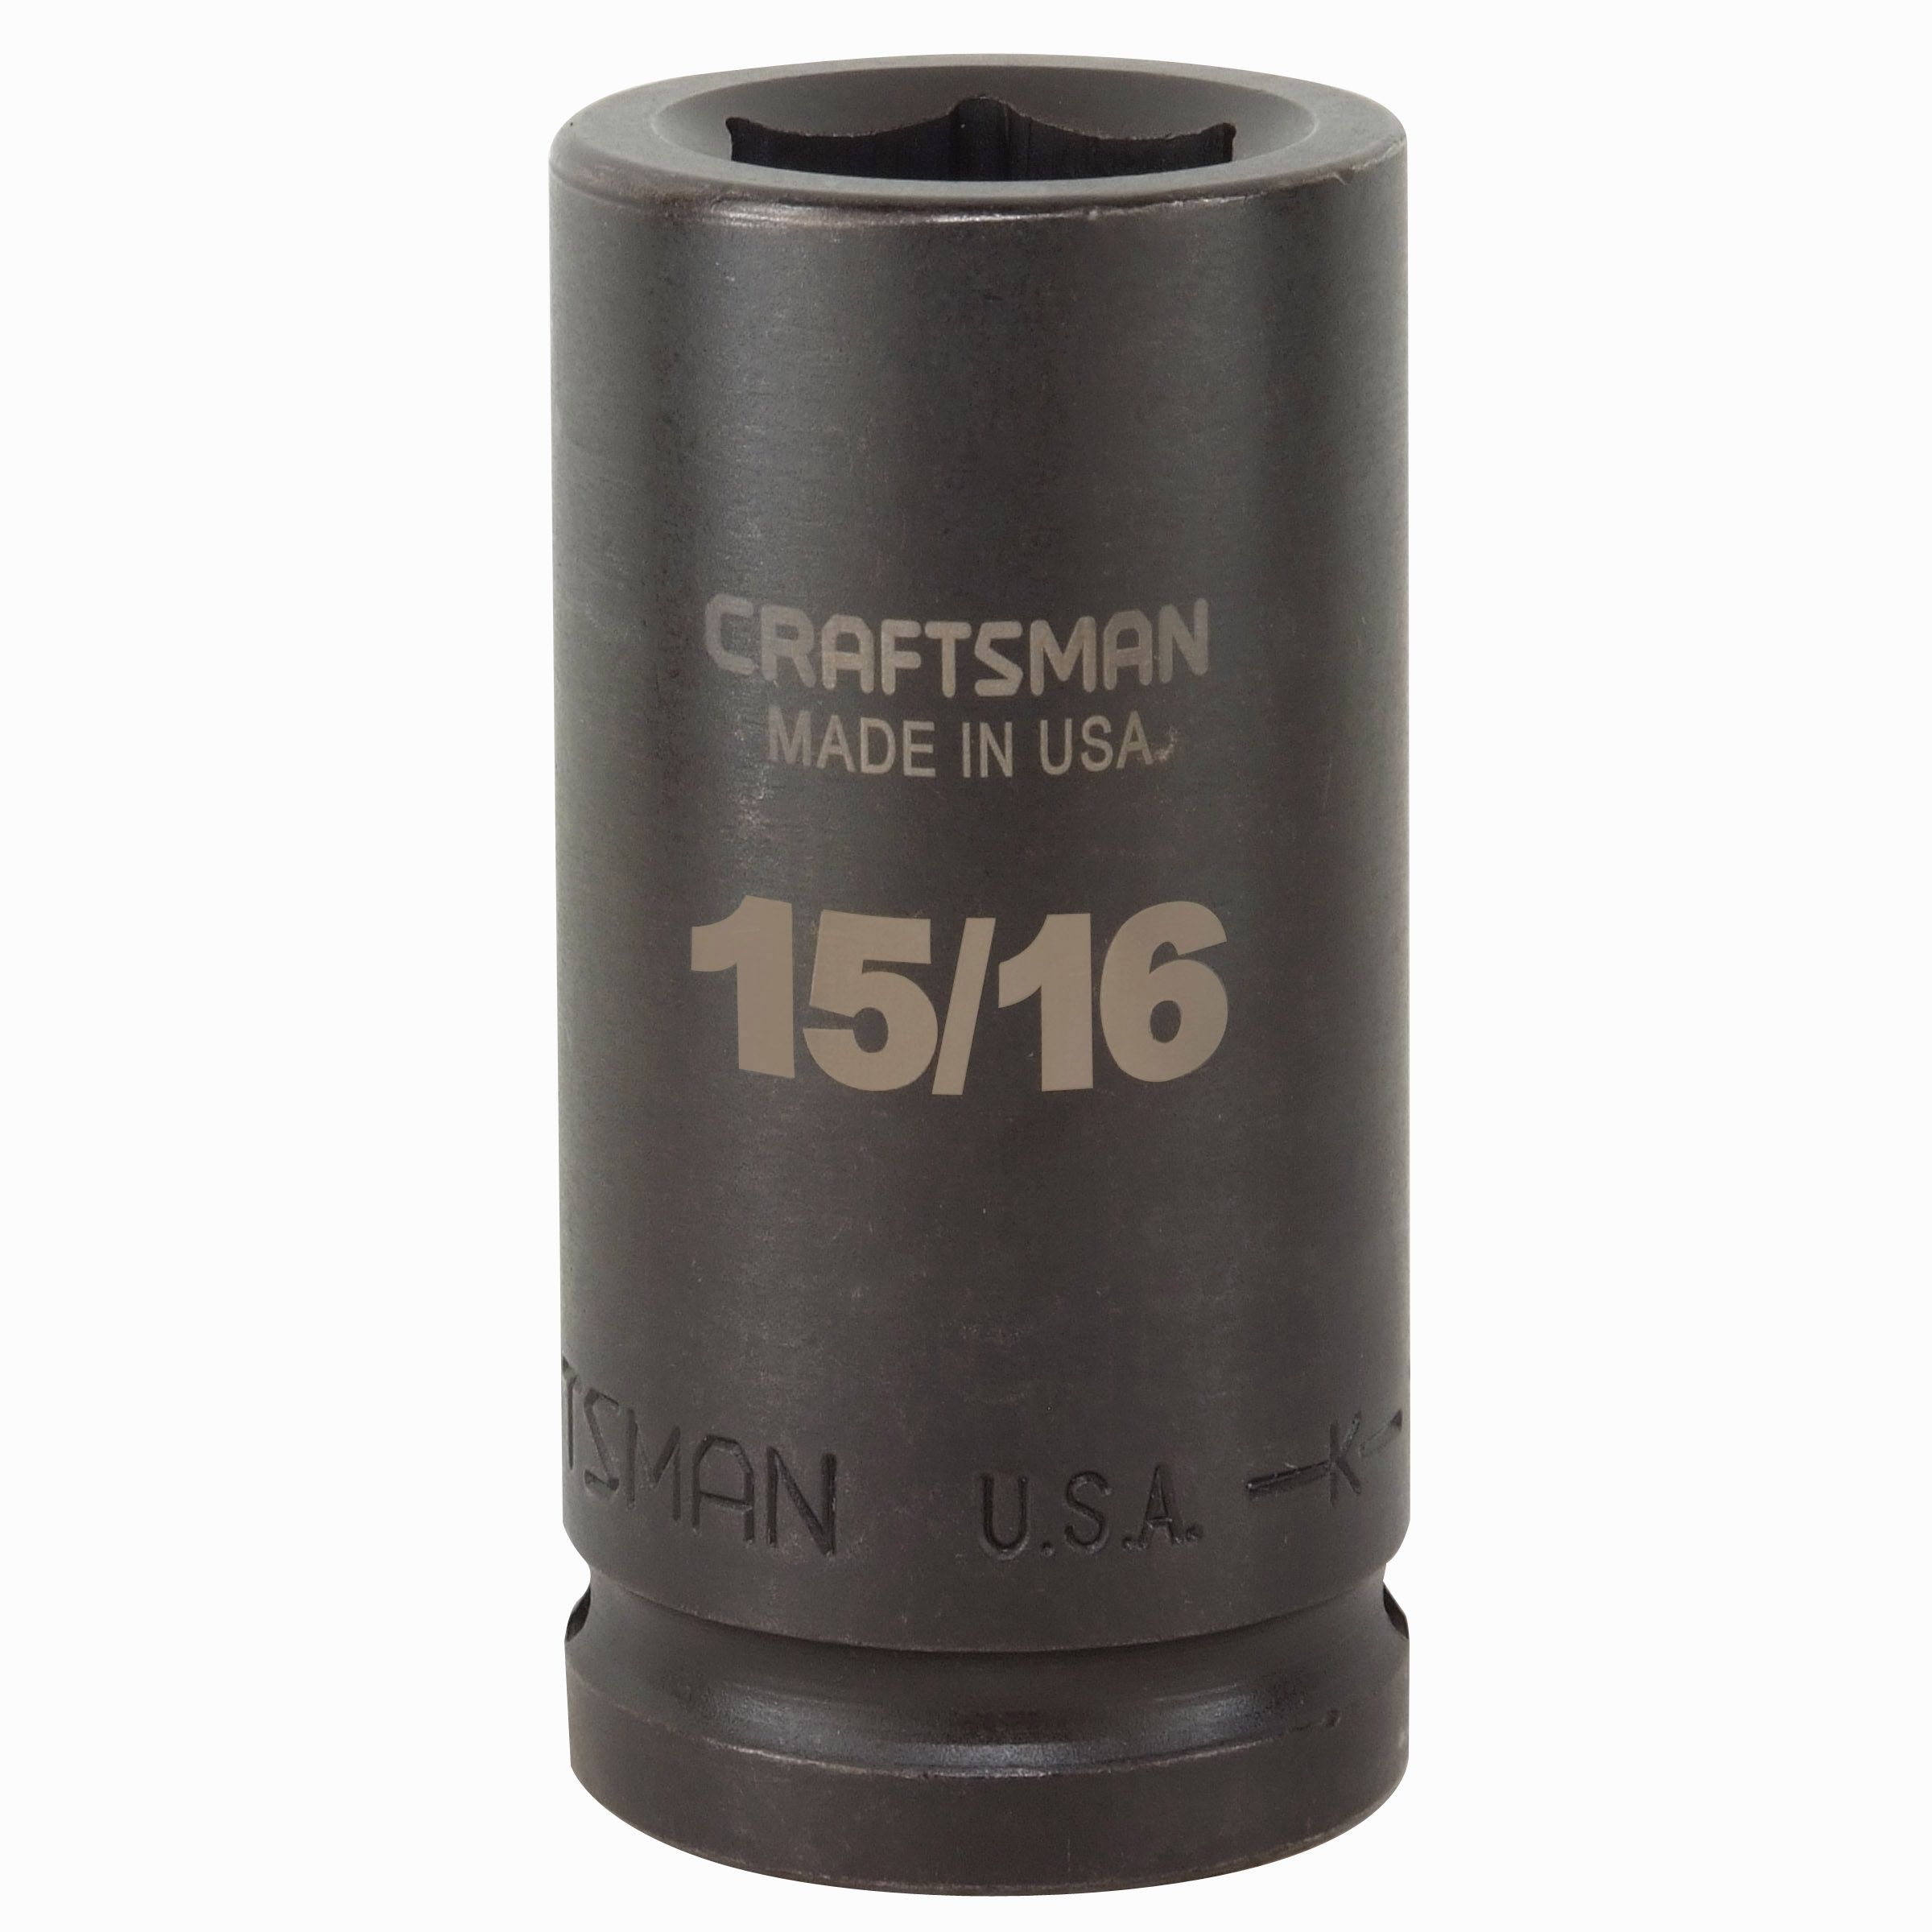 Craftsman 15/16 in. Easy-To-Read Impact Socket, 6 pt. Deep 3/4 in. Drive